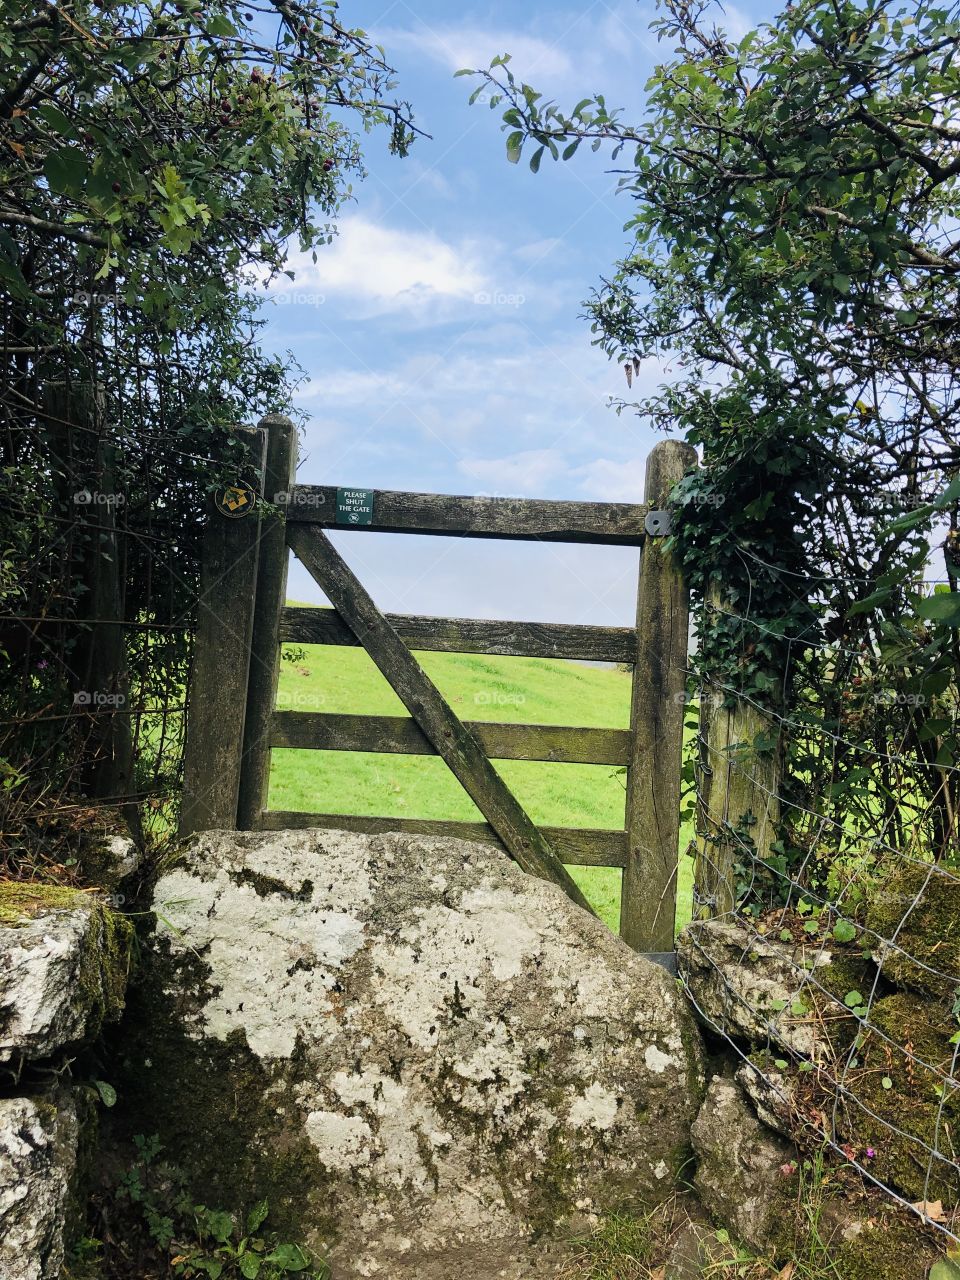 It is possible to stop and be amazed at gates like these at the panoramic views around one in Dartmoor.